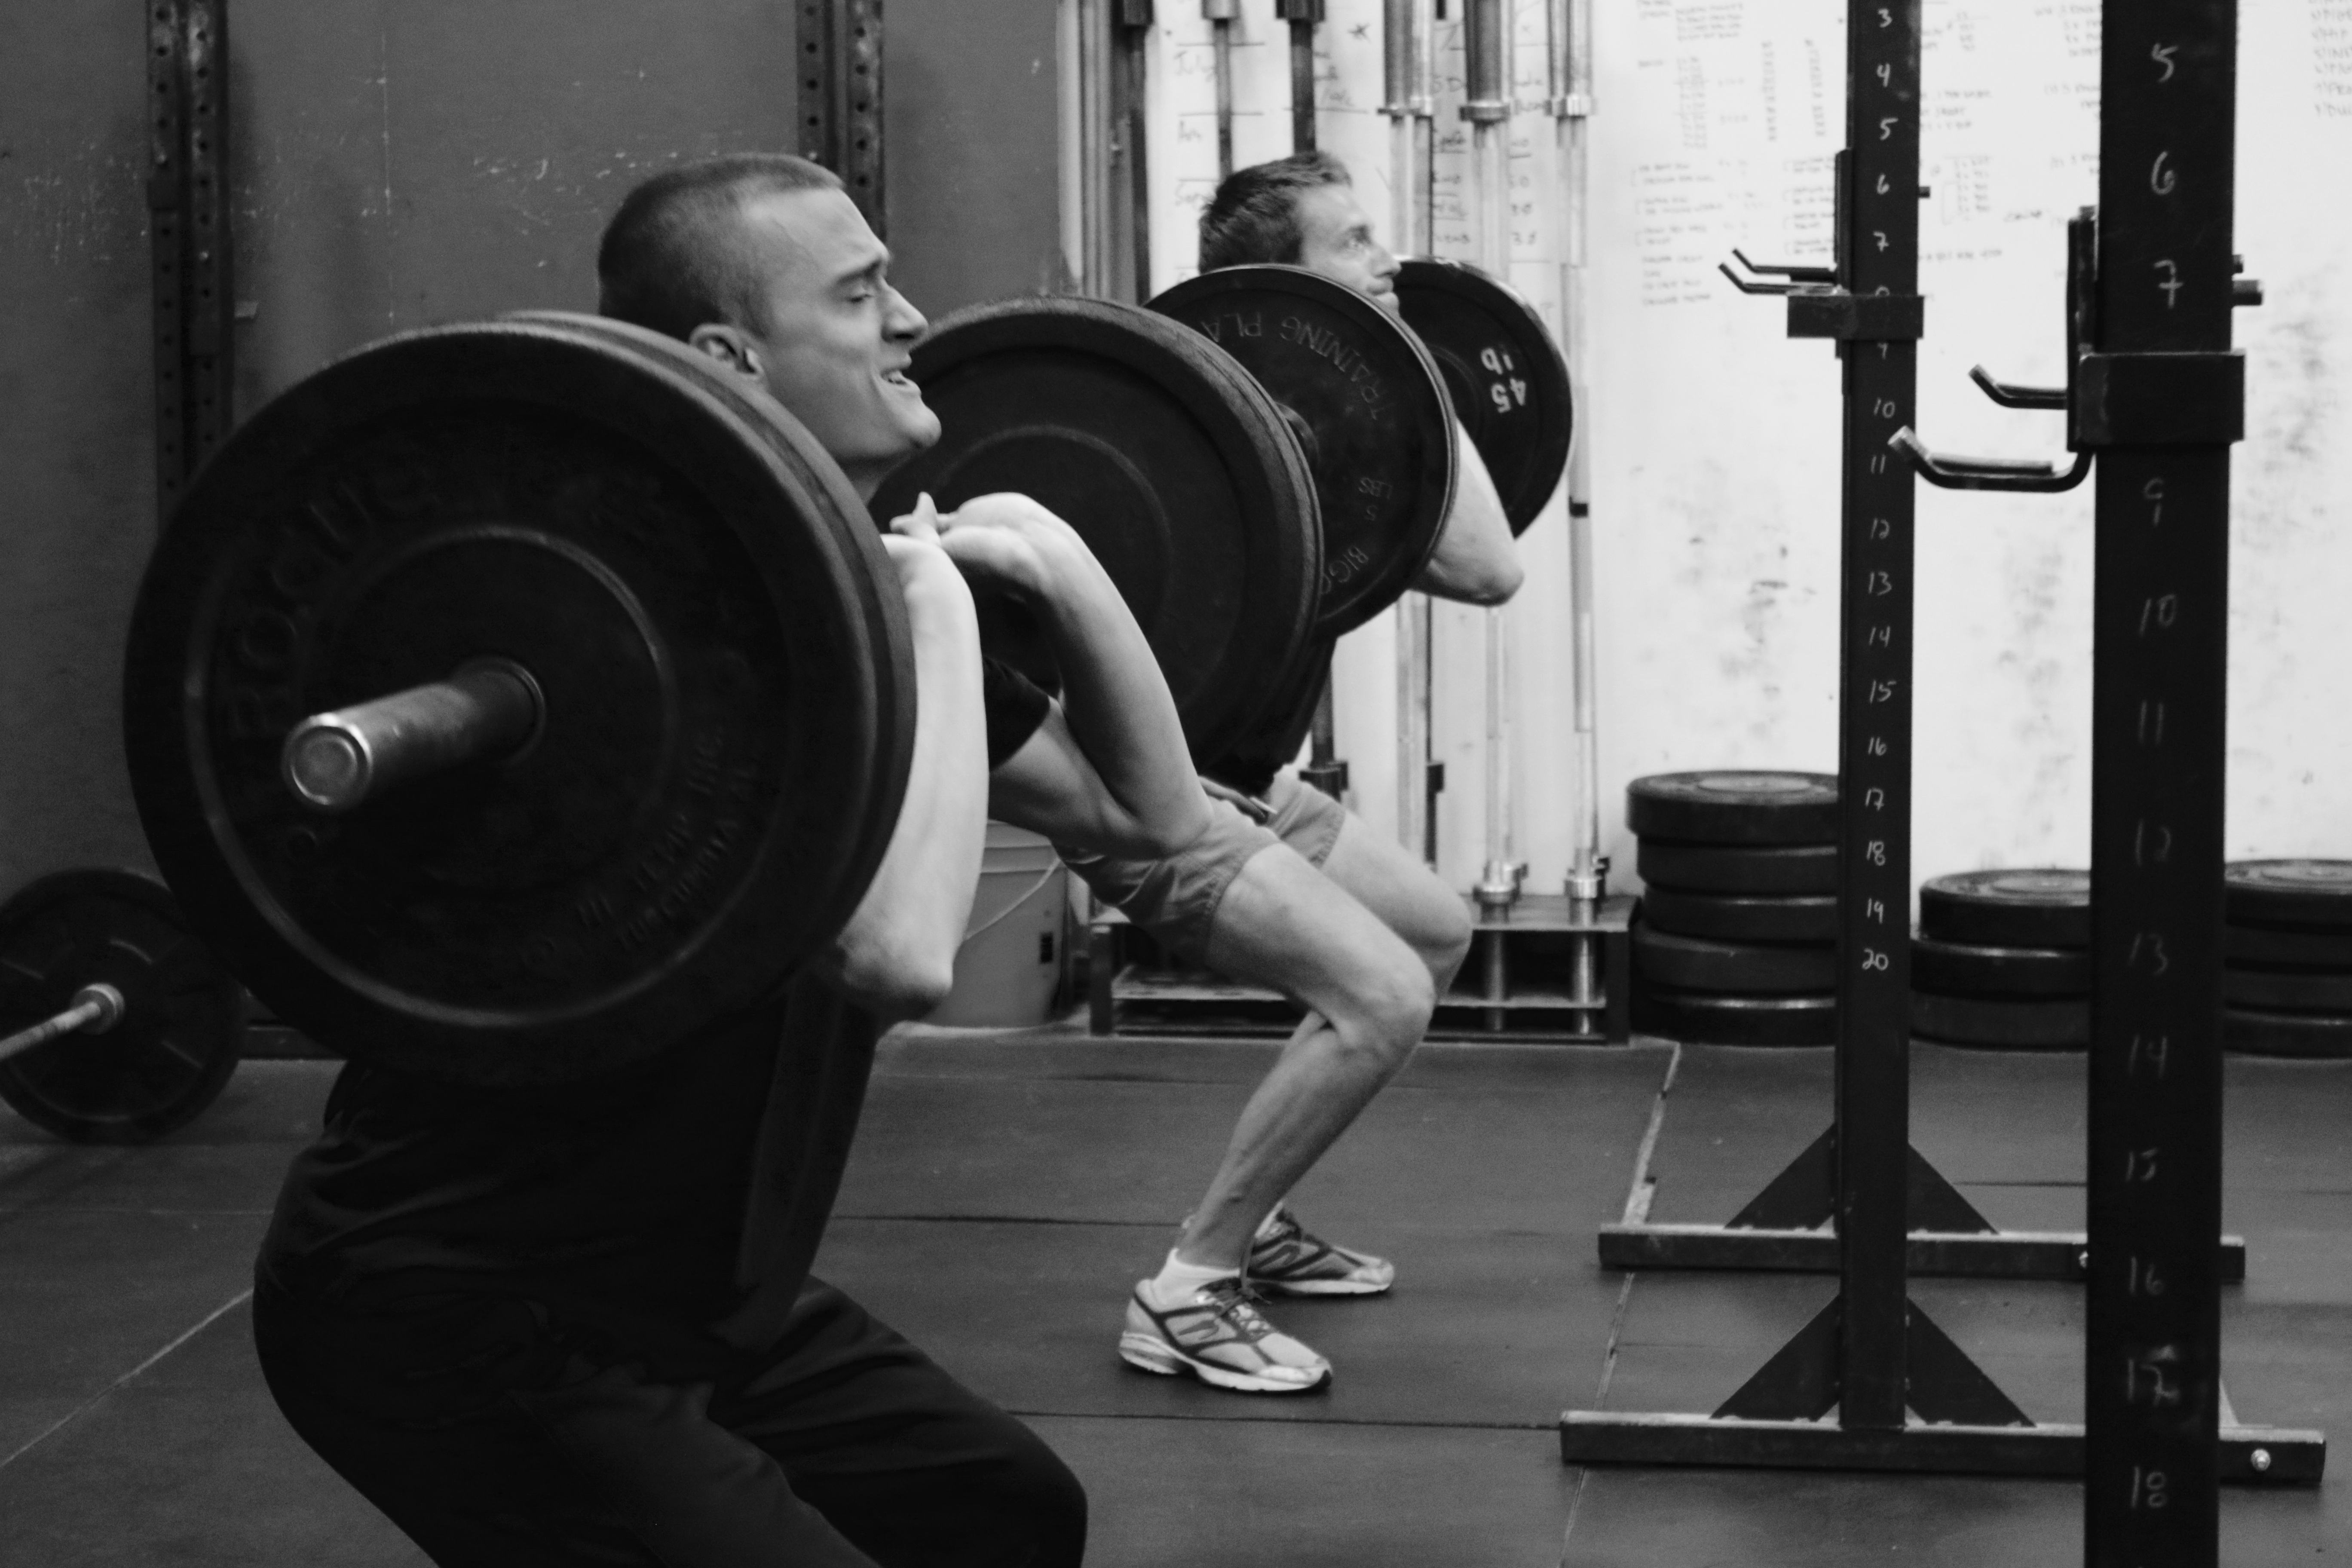 Developing A Work Capacity Standard  Part I: Power Calculations and CrossFit